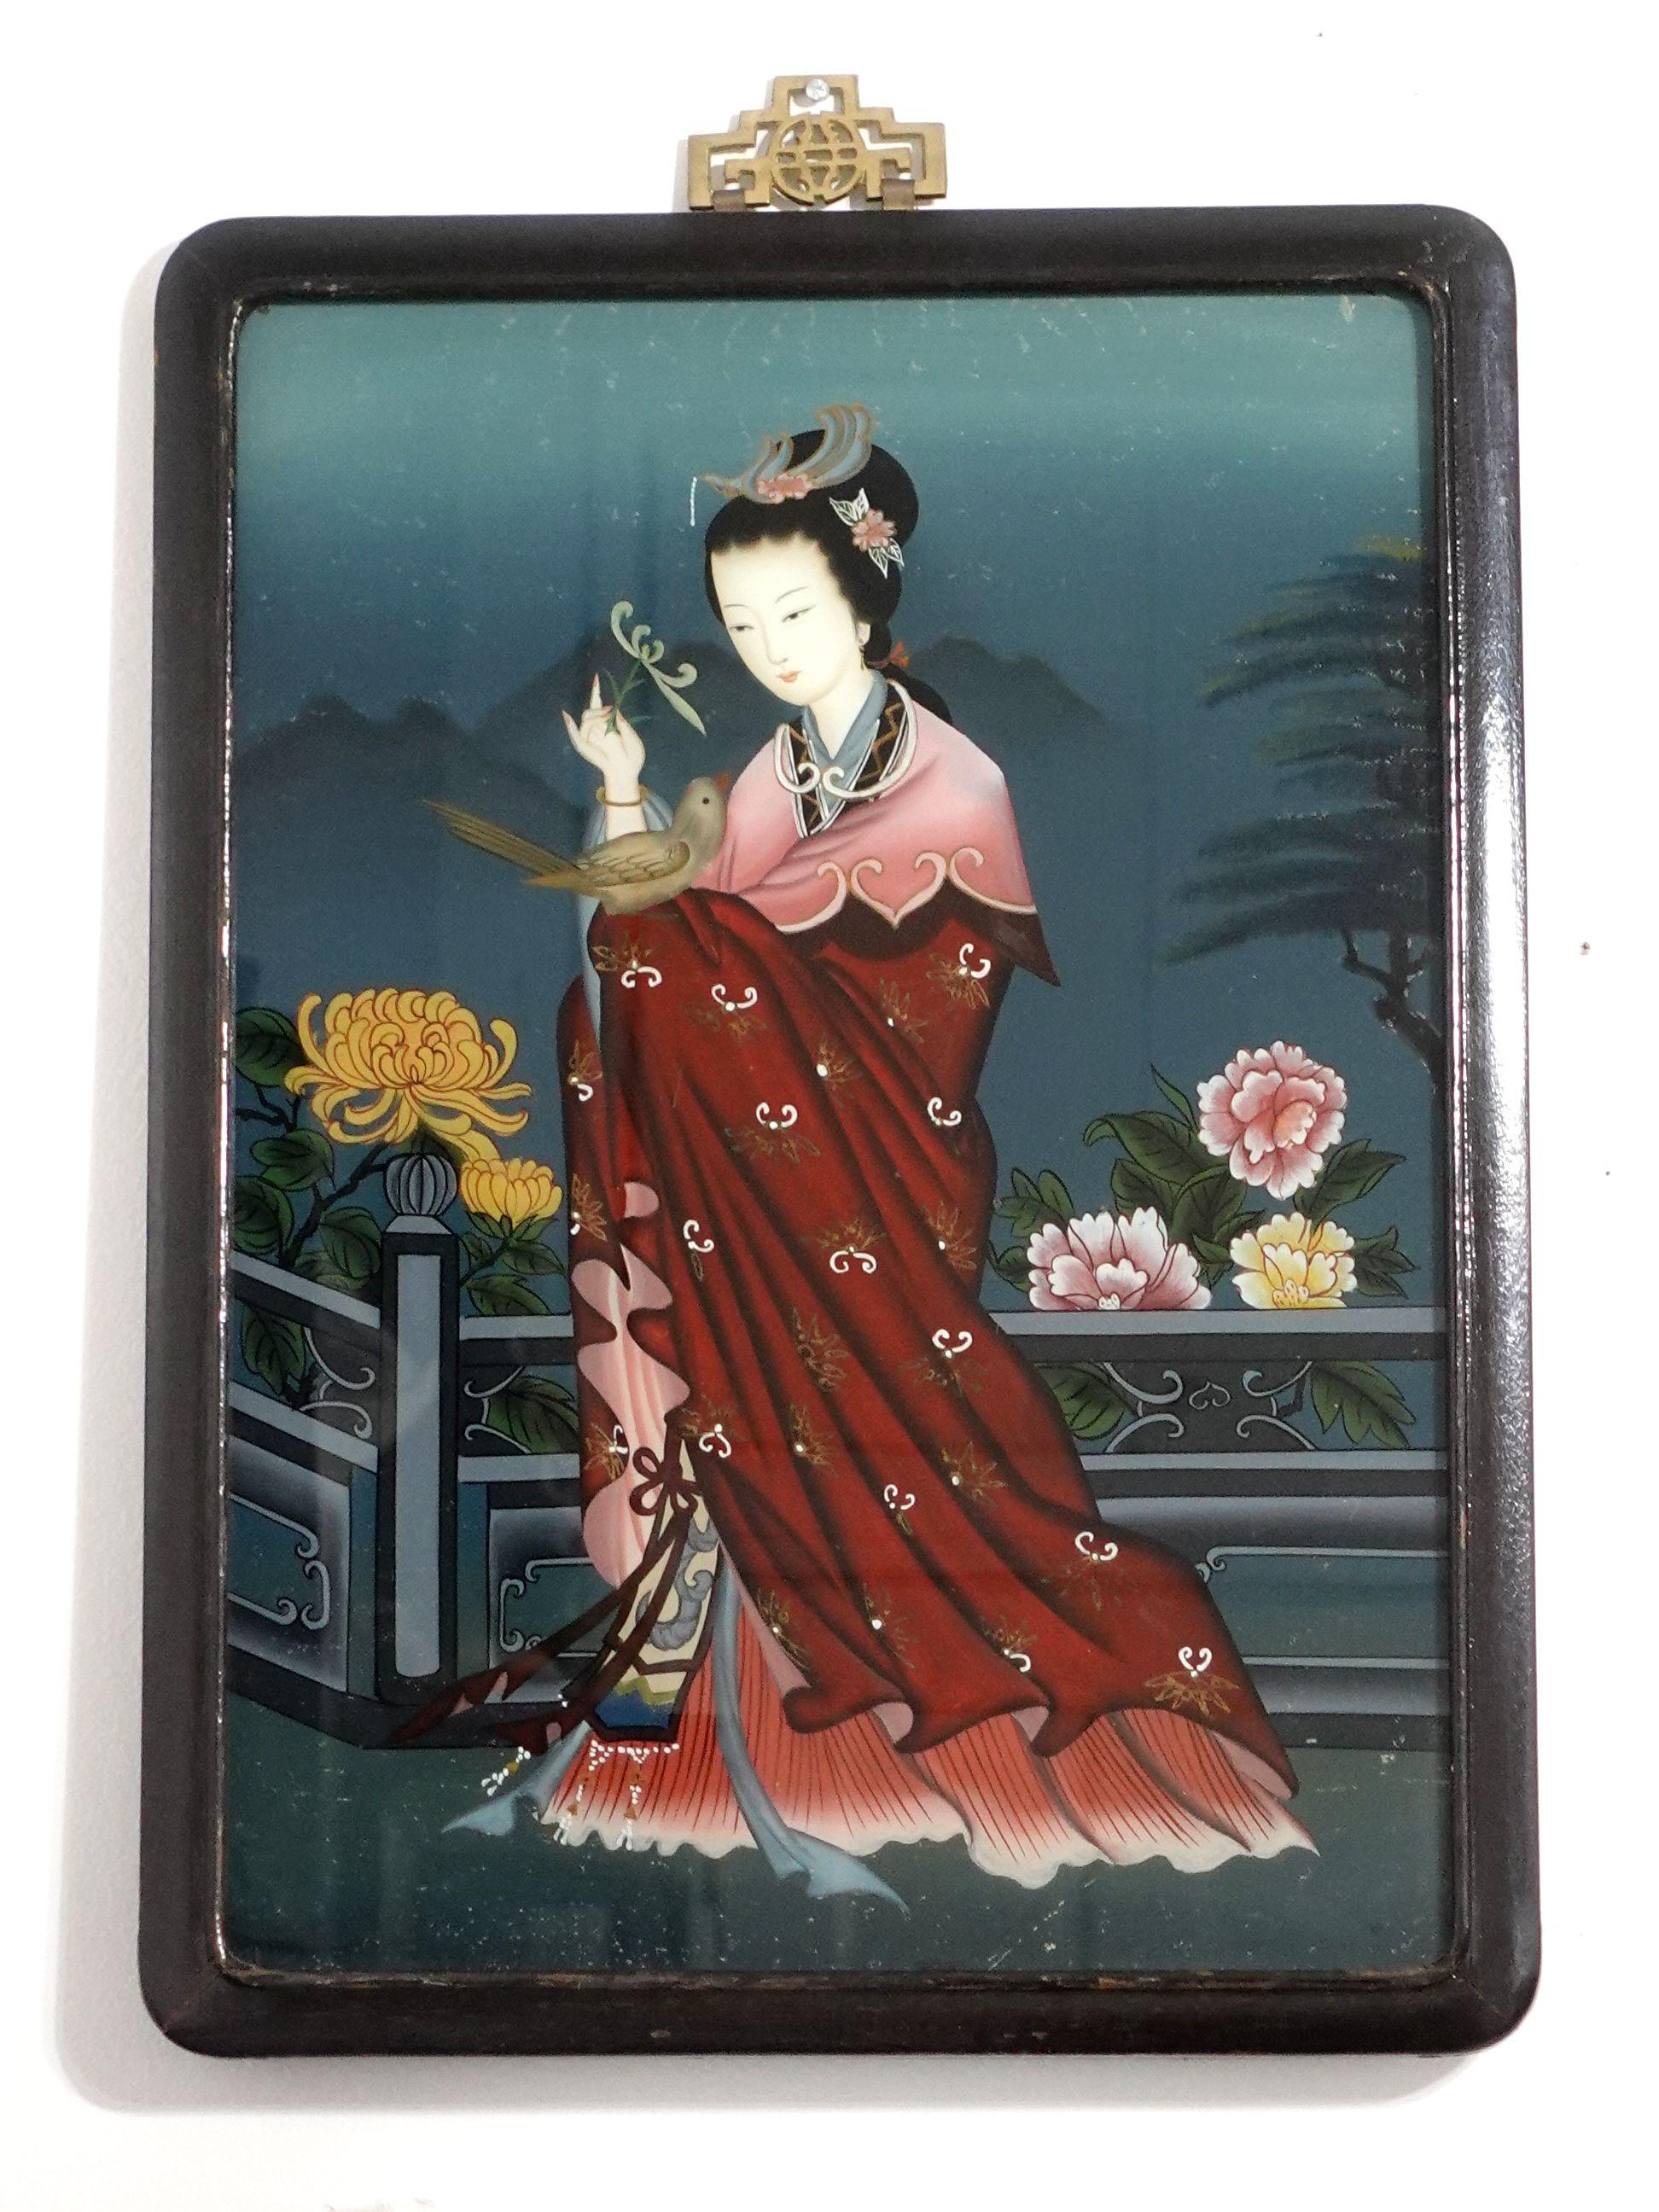 A charming late 19th-century to early 20th-century, Chinese export reverse glass painting, depicting a lady in the garden, playing with a bird. The painting comes with its original hardwood frame and the old pins in the back of the panel.
You may